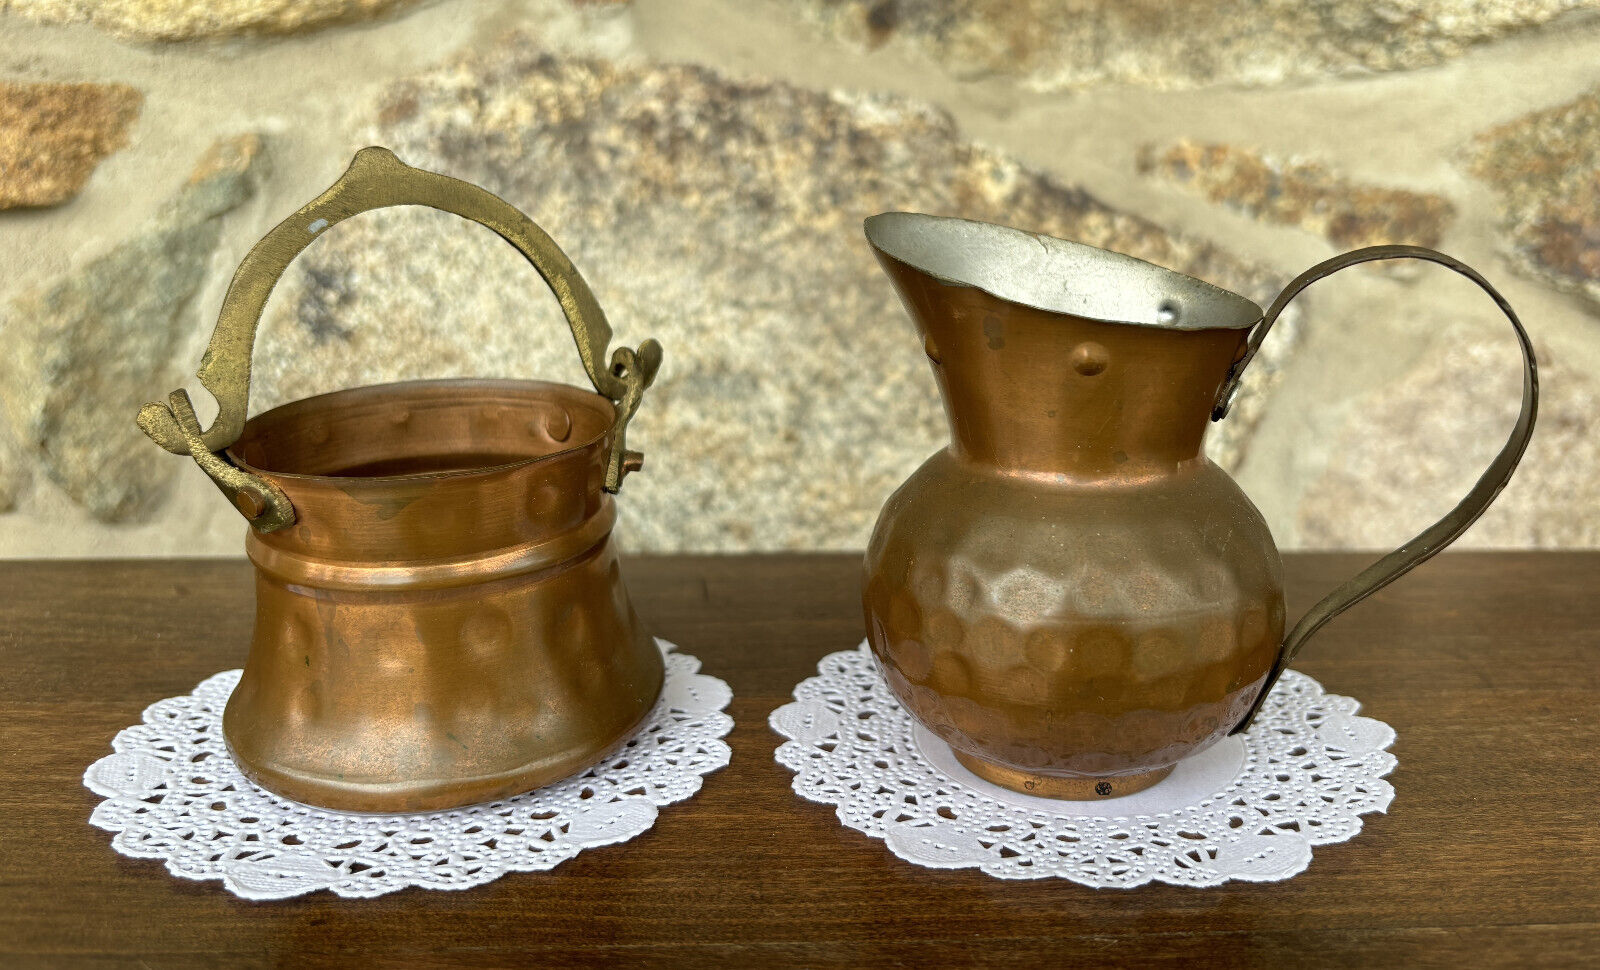 Hammered Small Metal Copper Cauldron Pot & Tin Lined Pitcher